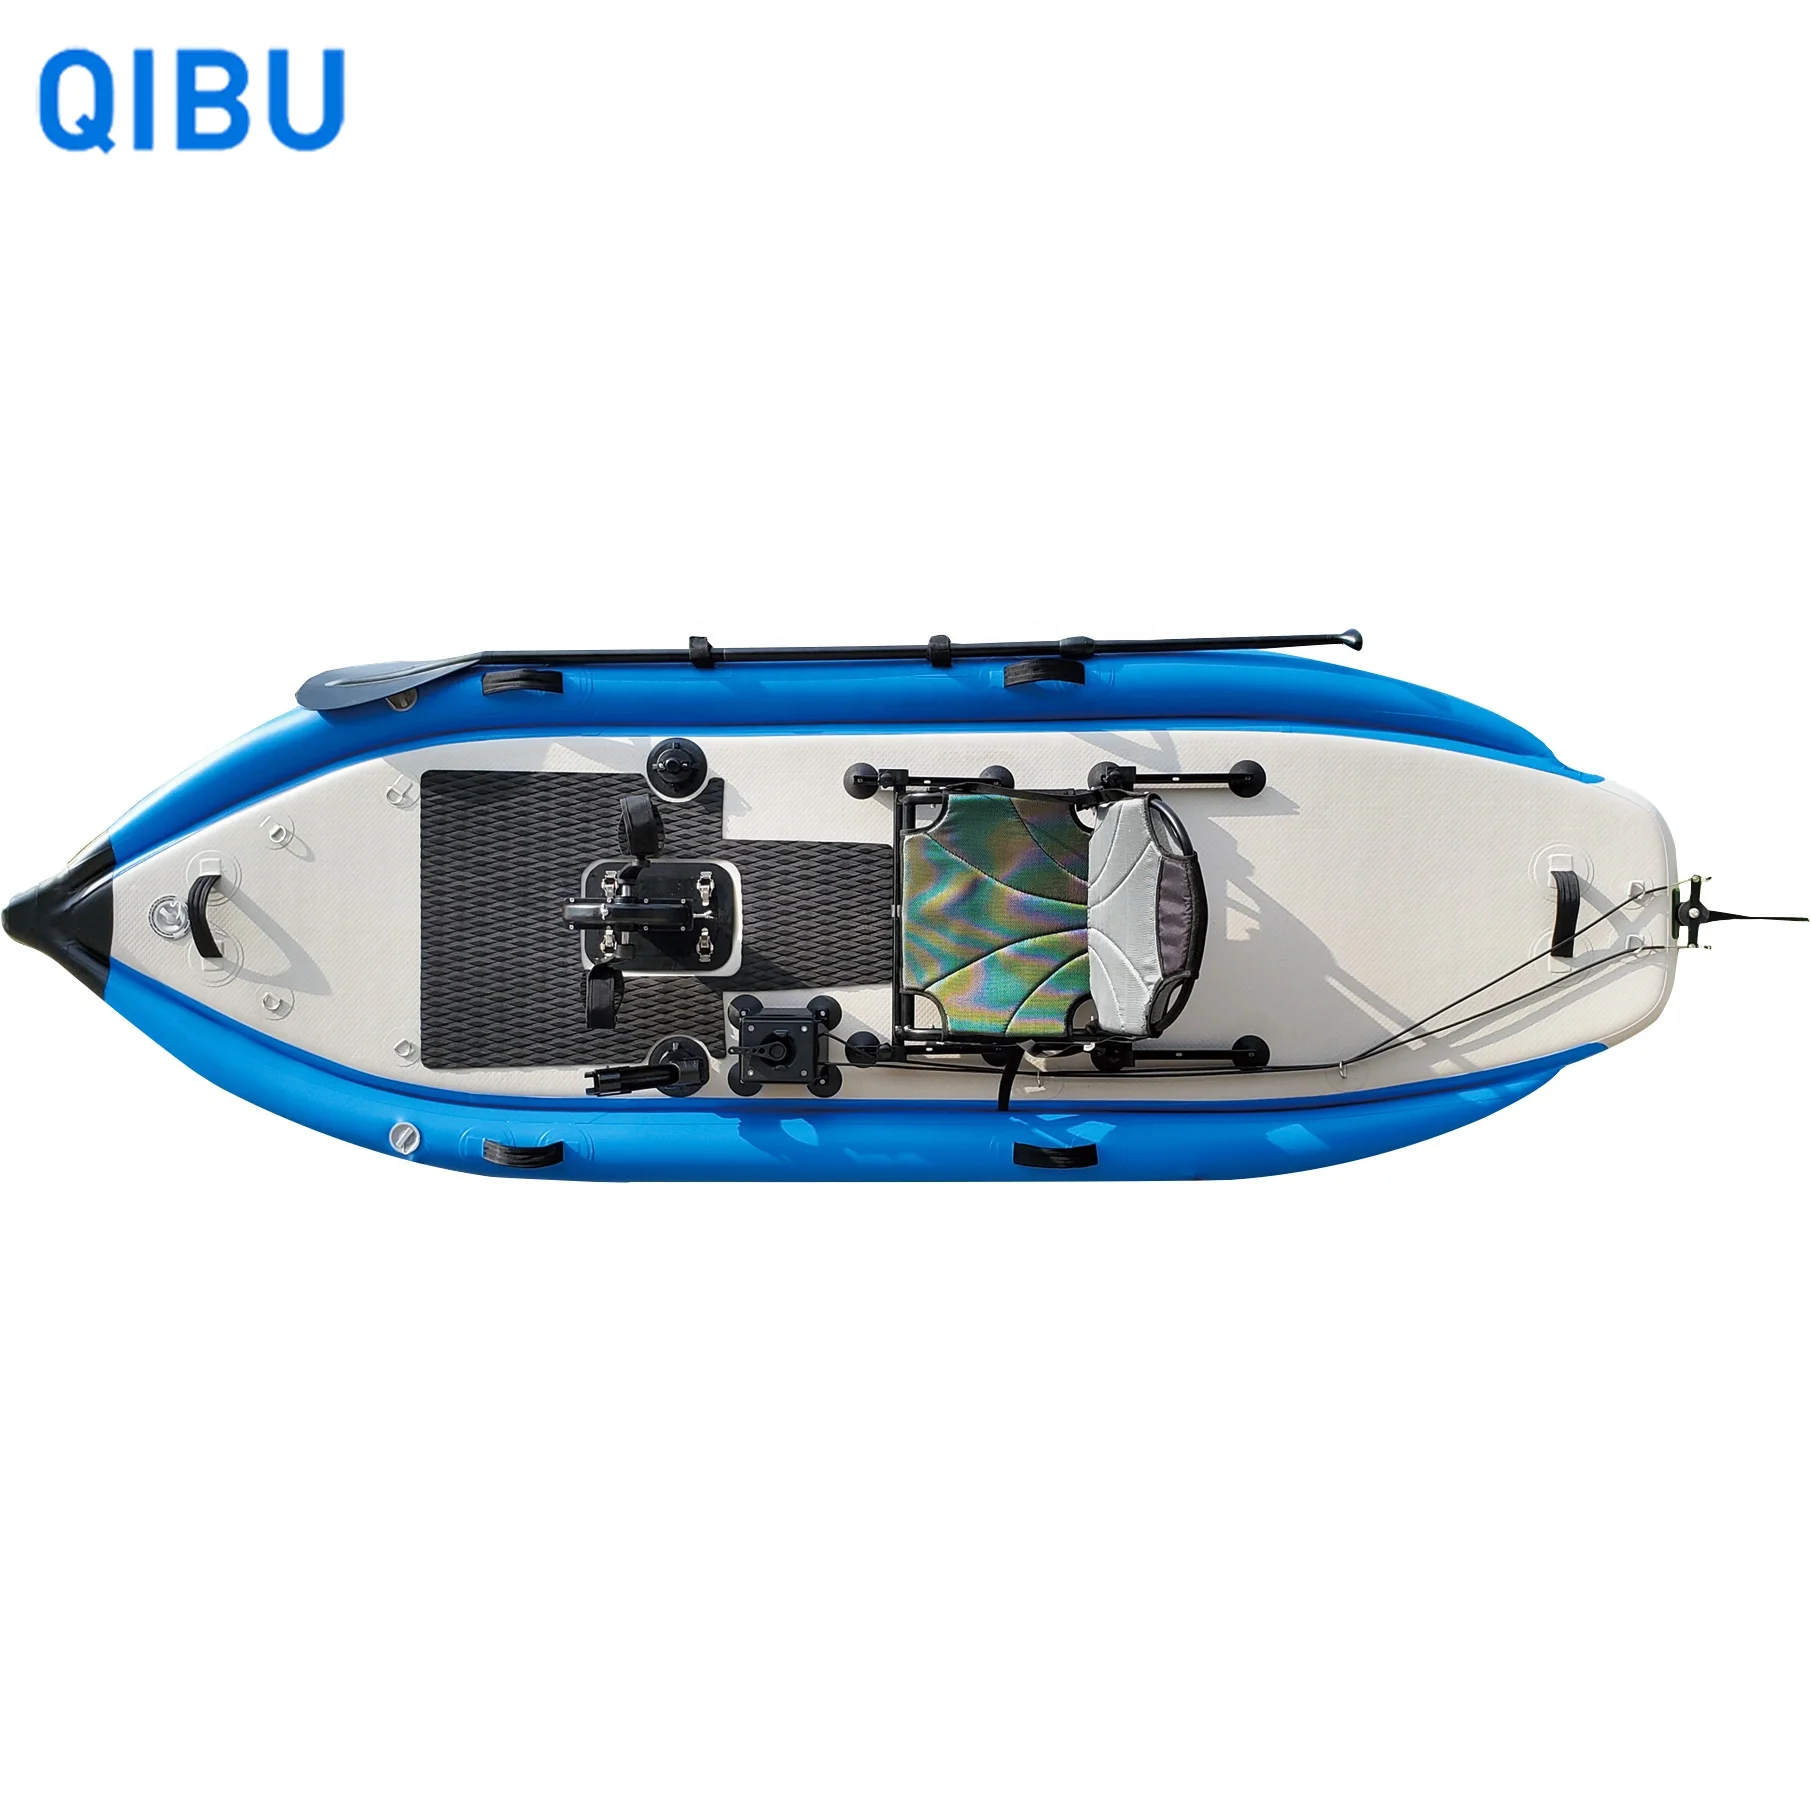 

Qibu PHT-02 High Quality Portable Inflatable Fishing Kayak Single Fishing Drop Stitch Kayak Fishing Kayak with Foot Pedal Pvc CE, Multi colors for choices